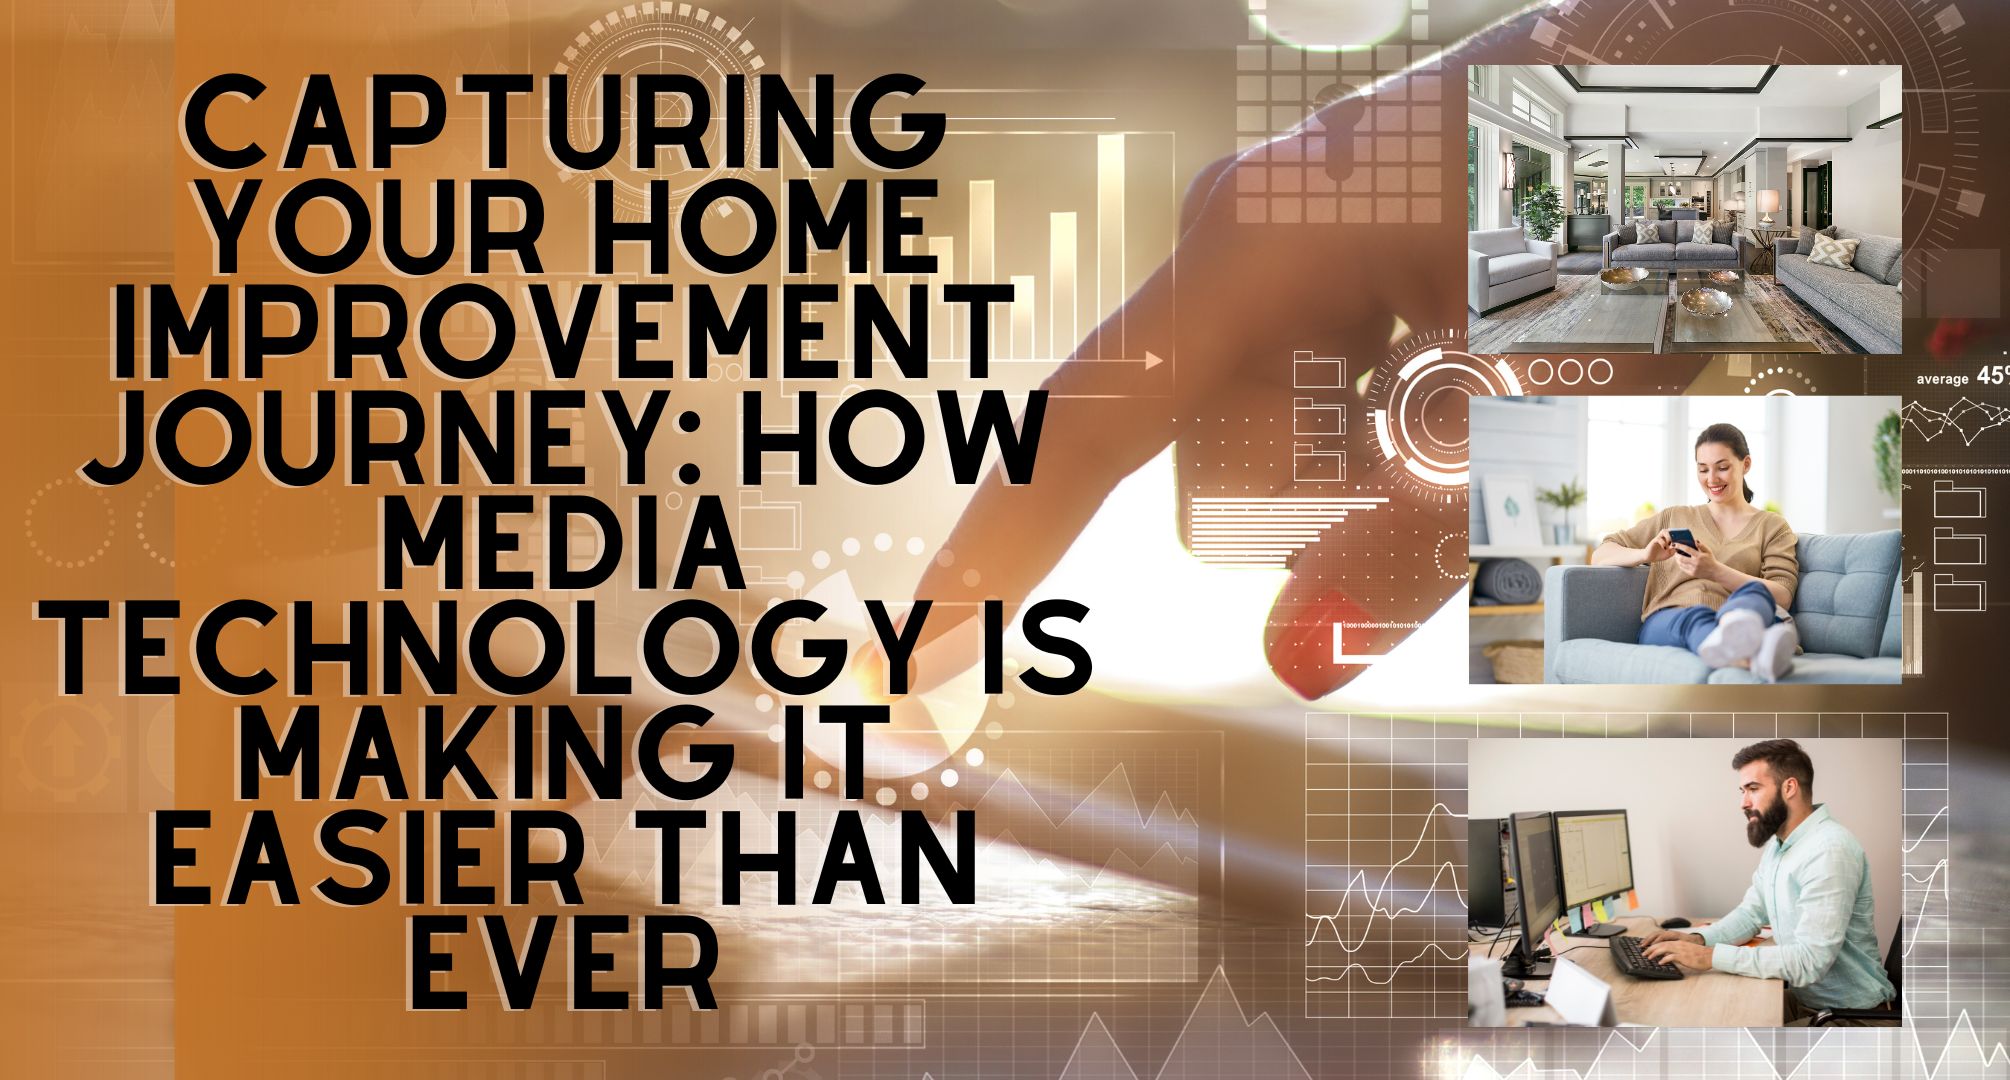 Capturing Your Home Improvement Journey: How Media Technology is Making it Easier Than Ever